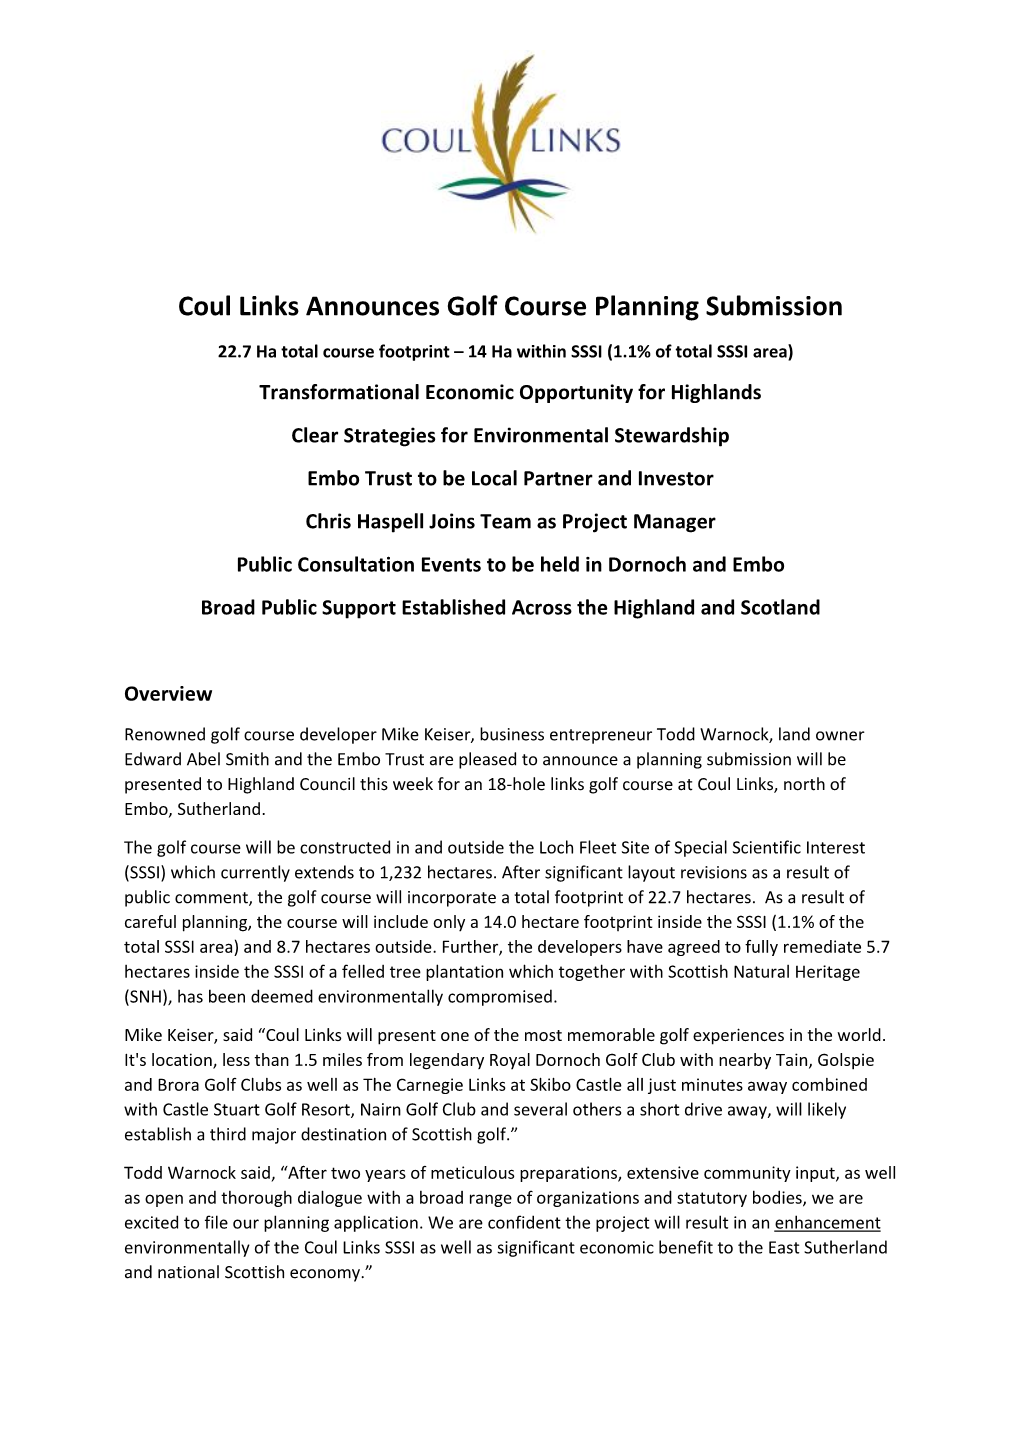 Coul Links Golf Press Release Final for Release